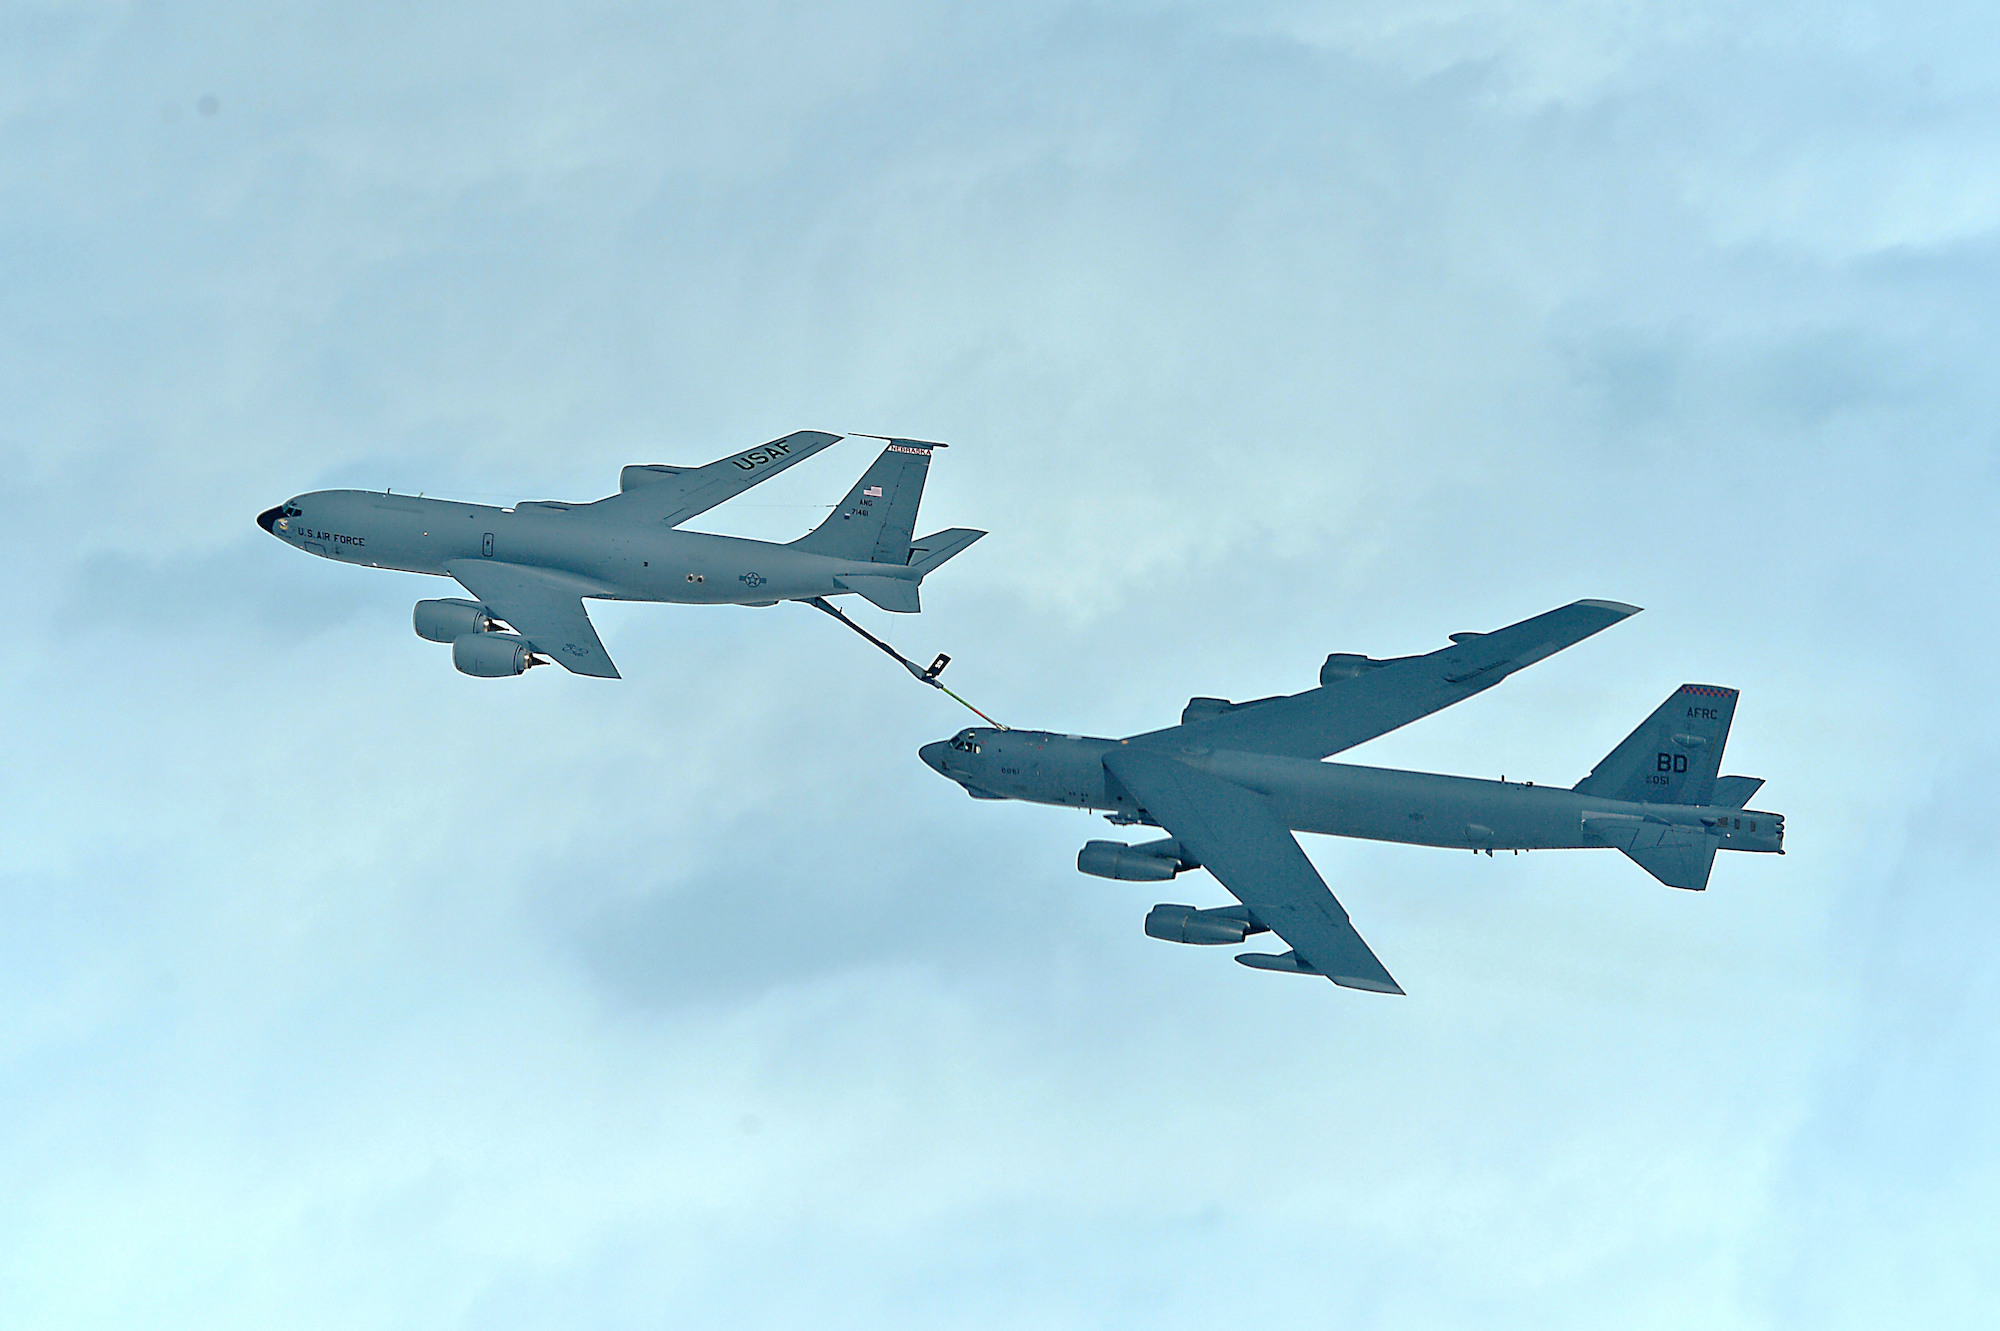 Refueling B-52s in the sky is hard, so the Air Force is trying VR simulators